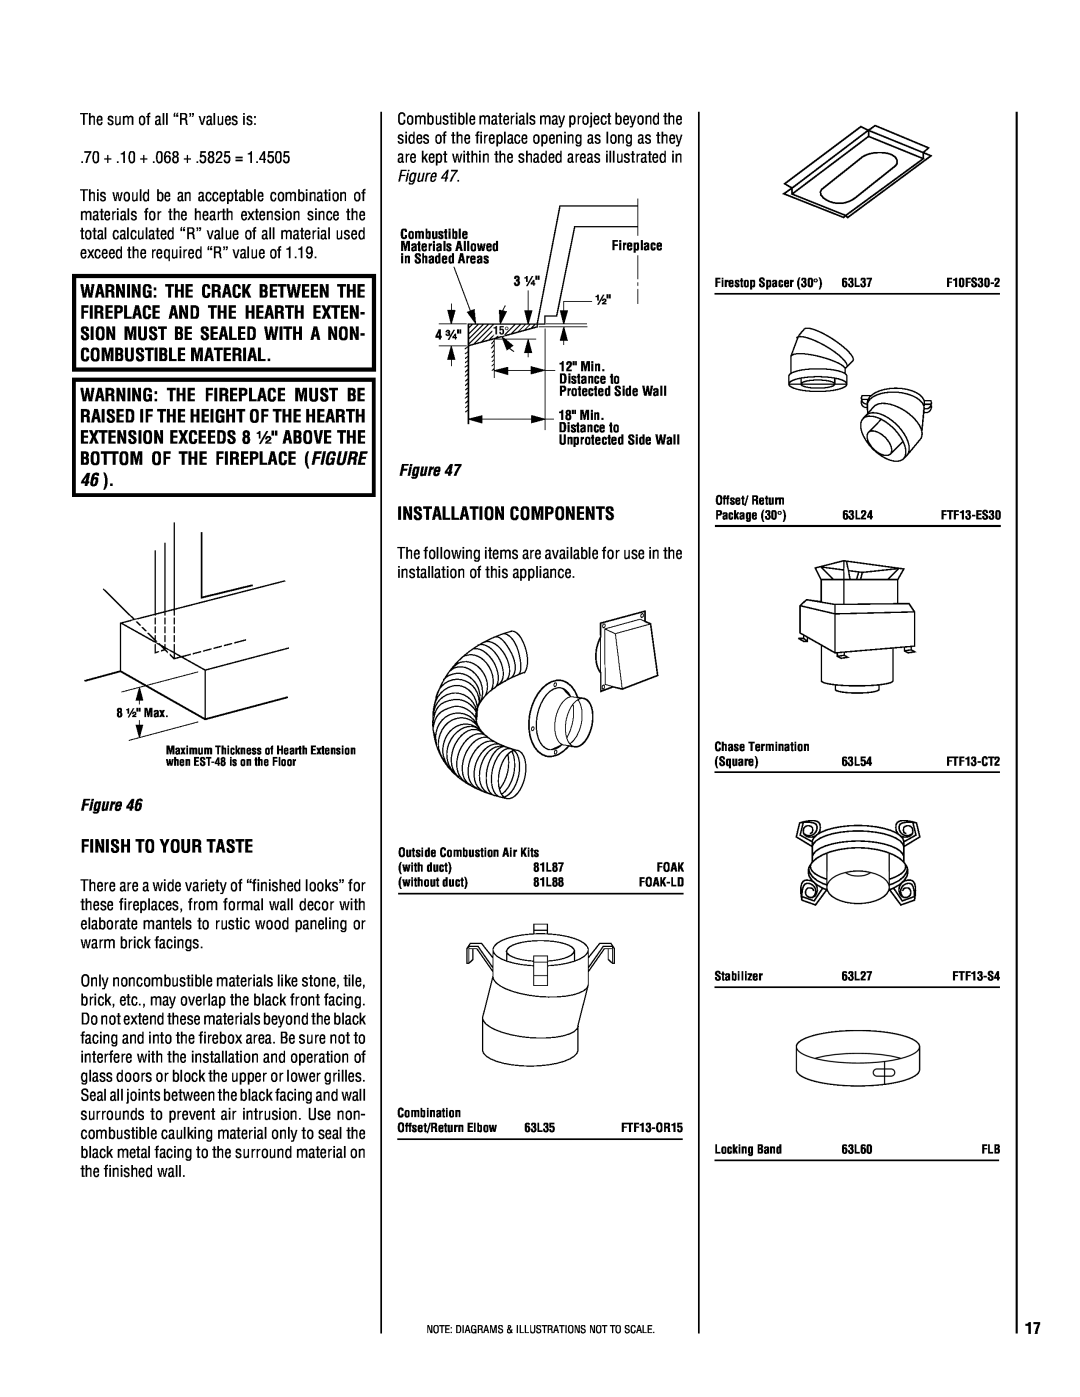 Lucent Technologies EST-48 installation instructions Finish To Your Taste, Installation Components, Figure 